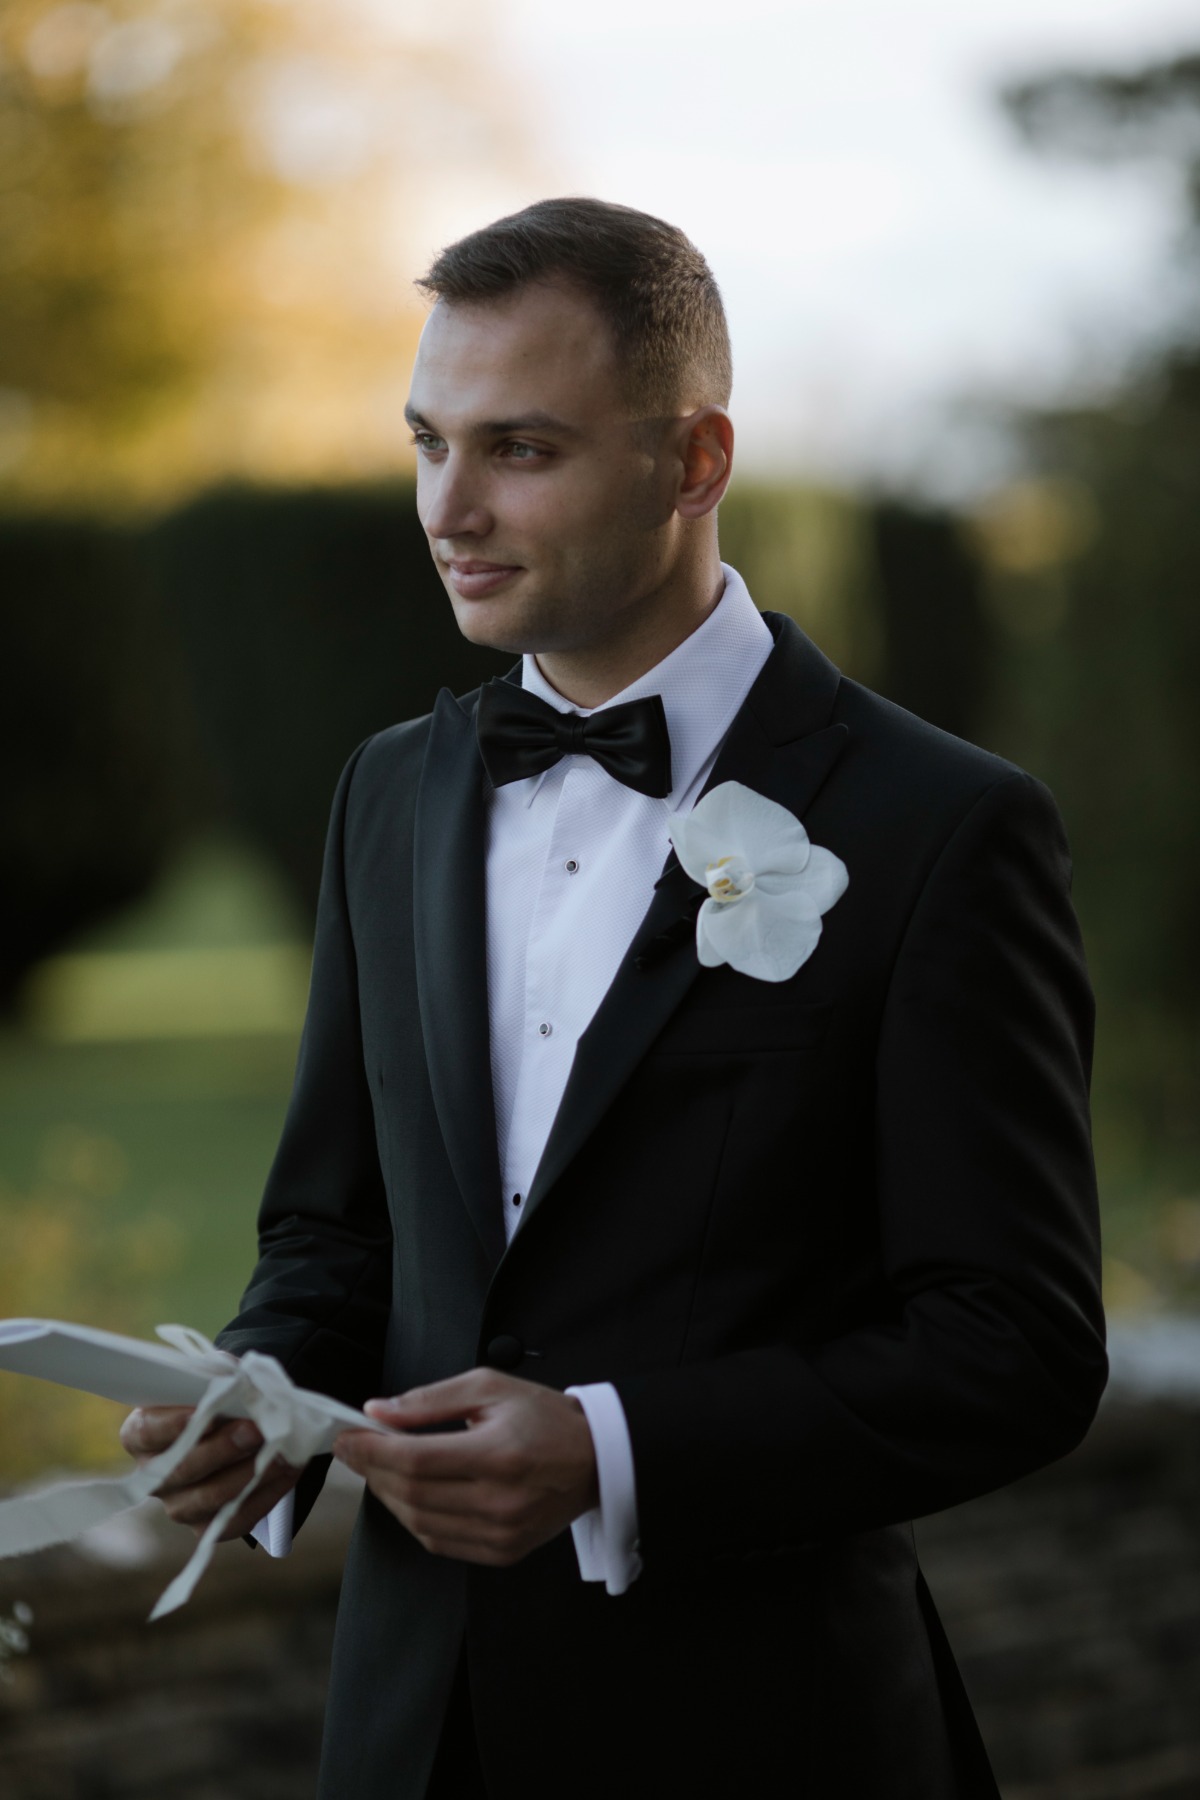 How to write the groom's vows